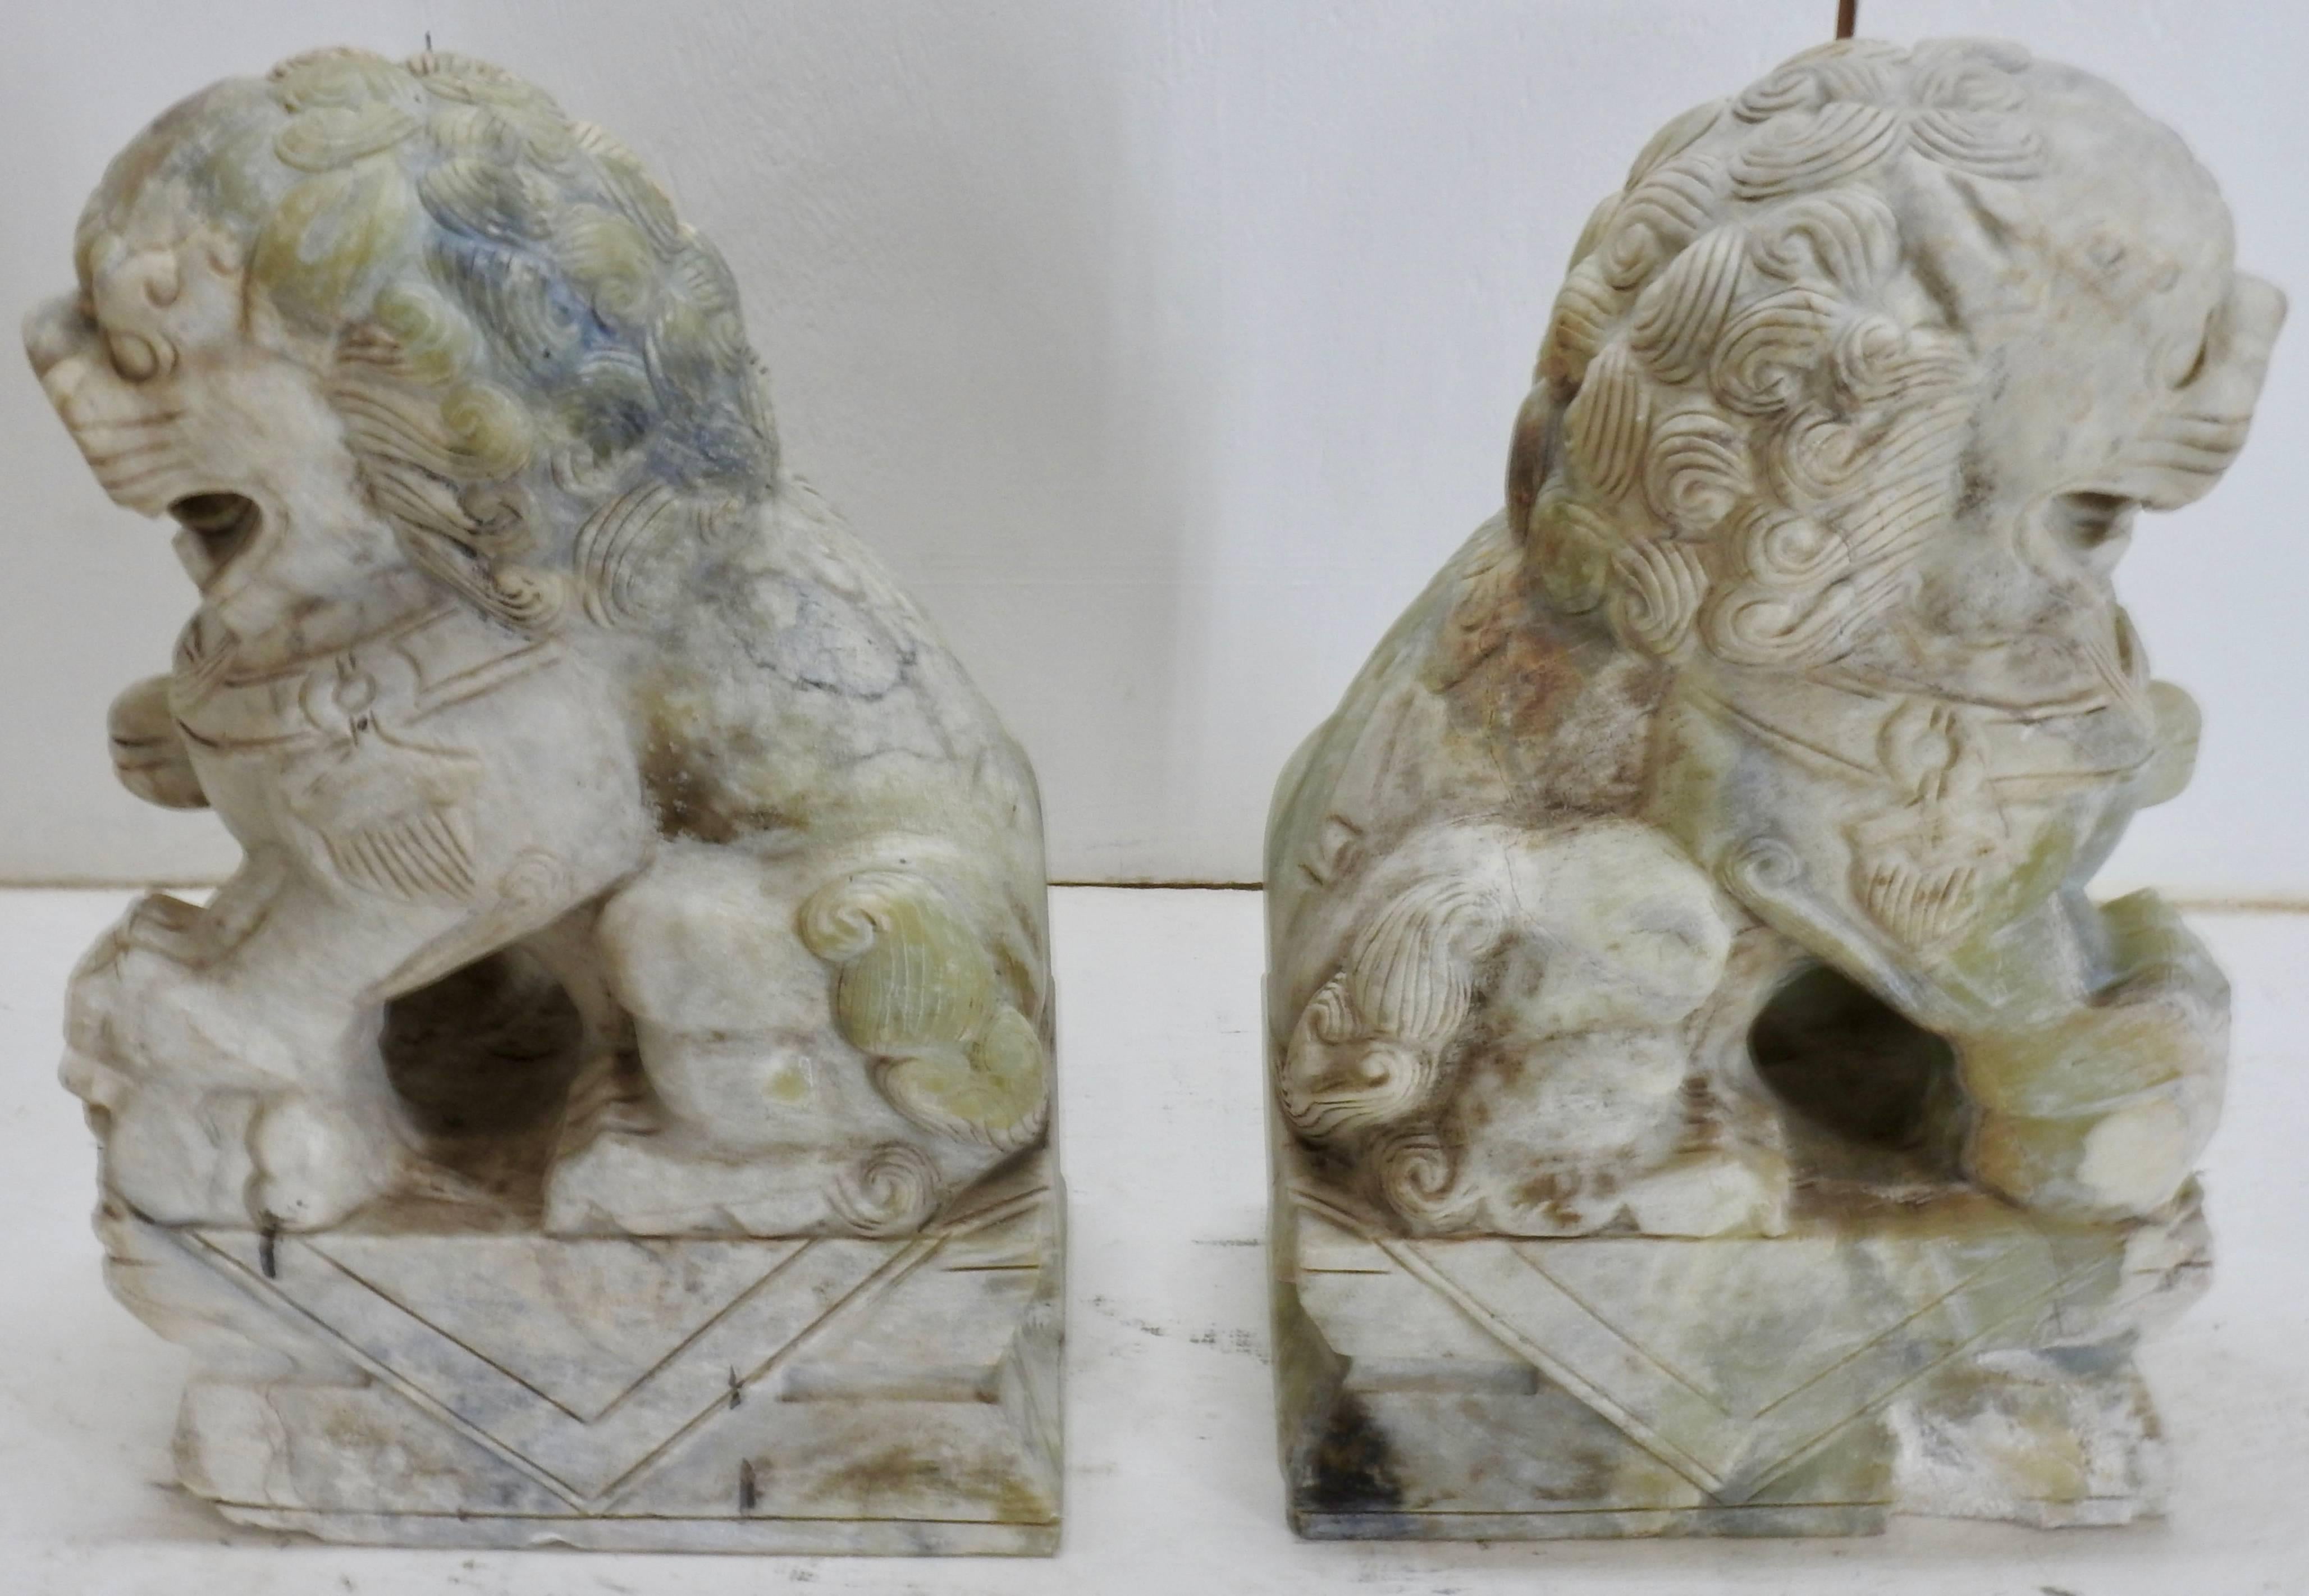 An elegant pair of Tibetan guardian foo dogs made of alabaster. Their fierce grins will be a unique addition to your collection. The detailed carving on these are very nice!